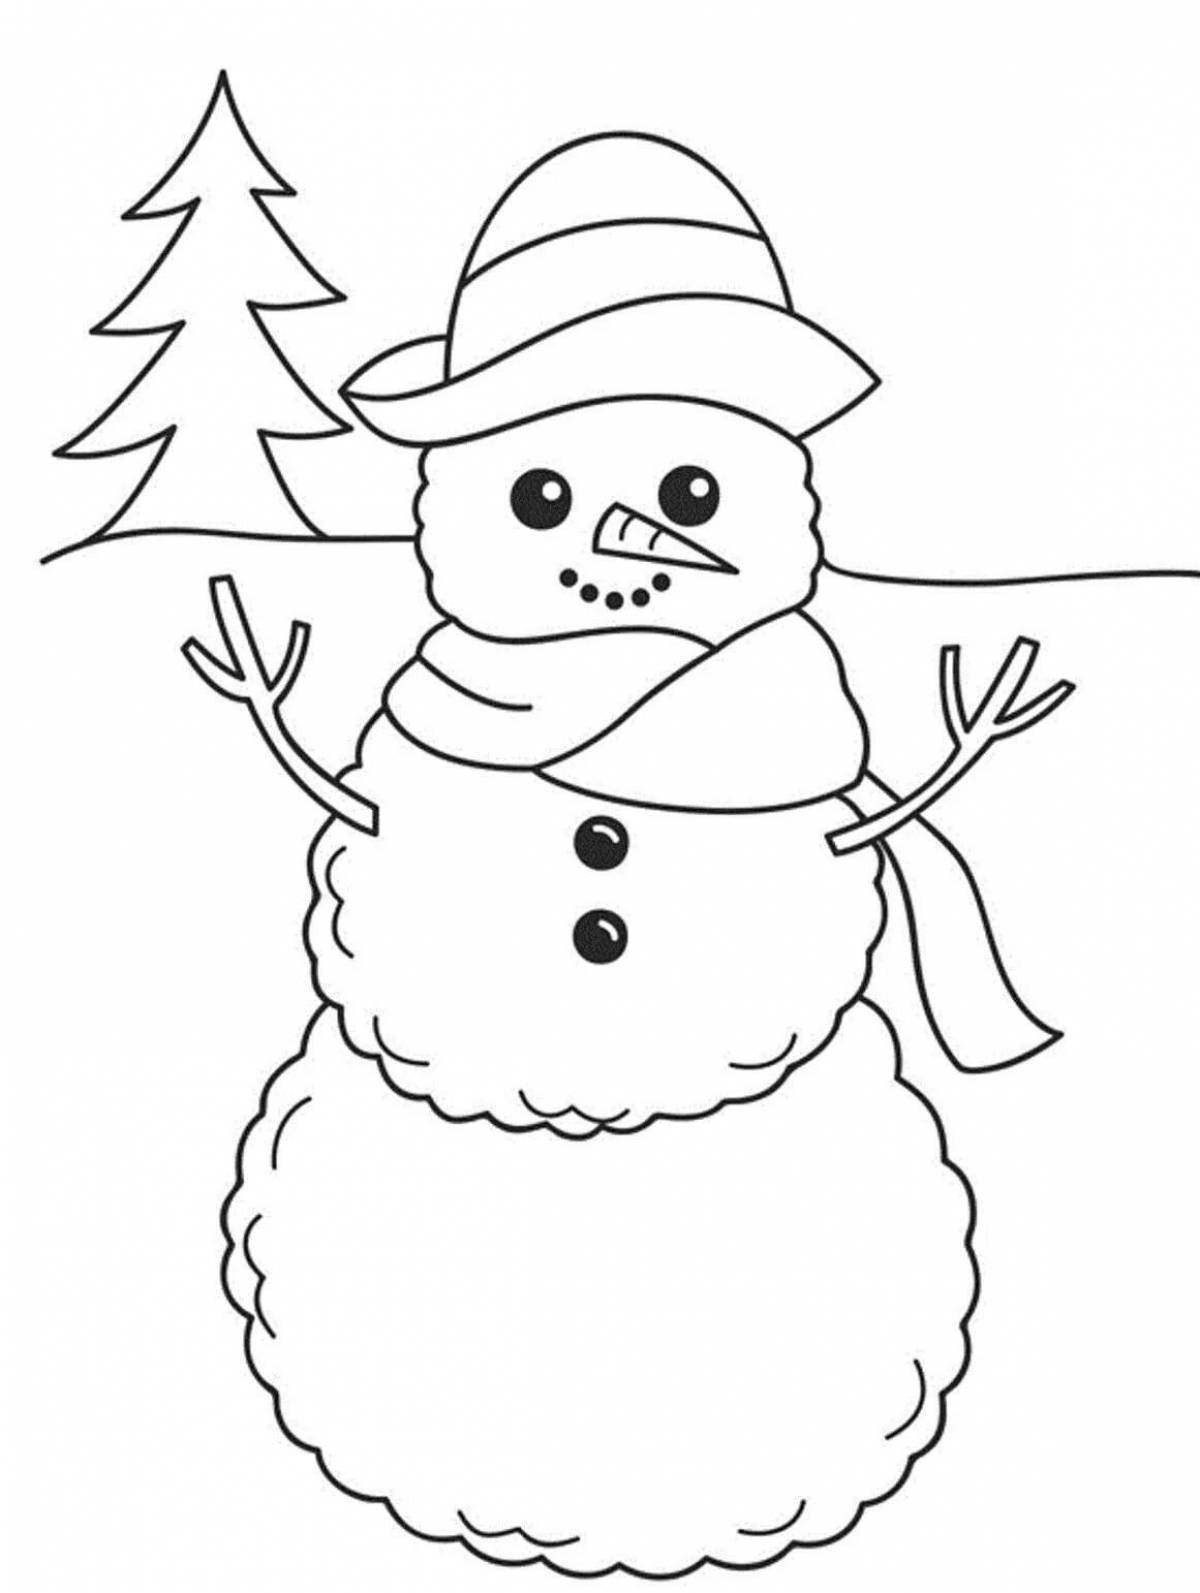 Smiling snowman coloring page